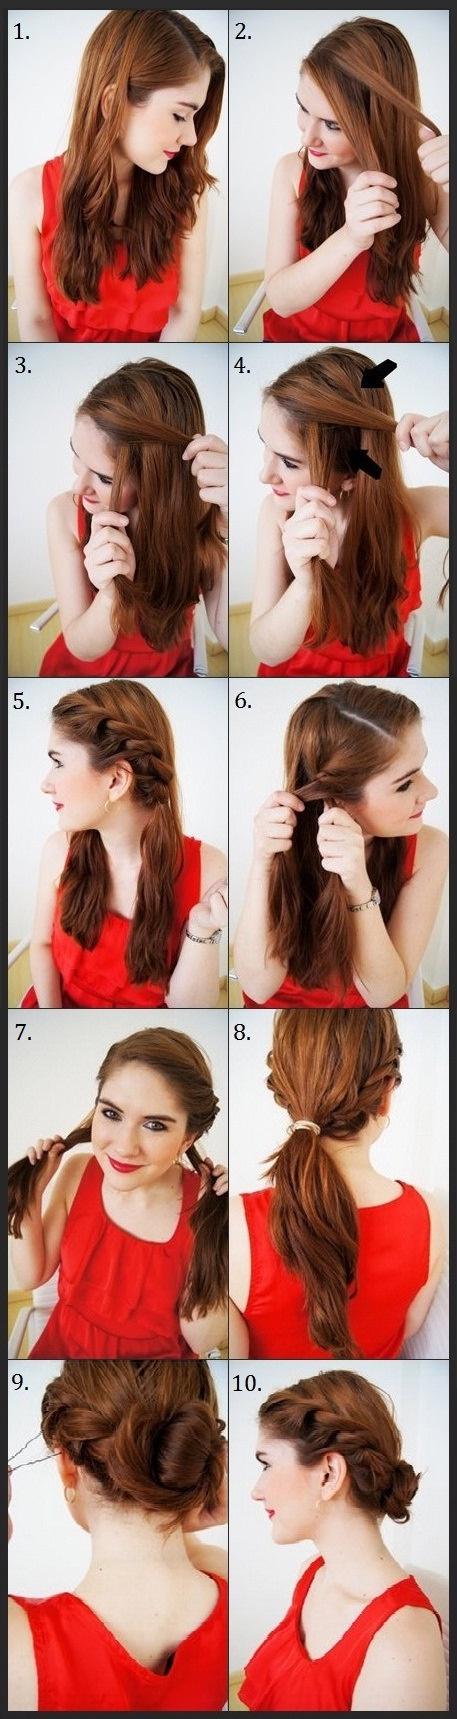 Cool quick and easy hairstyles cool-quick-and-easy-hairstyles-90_11